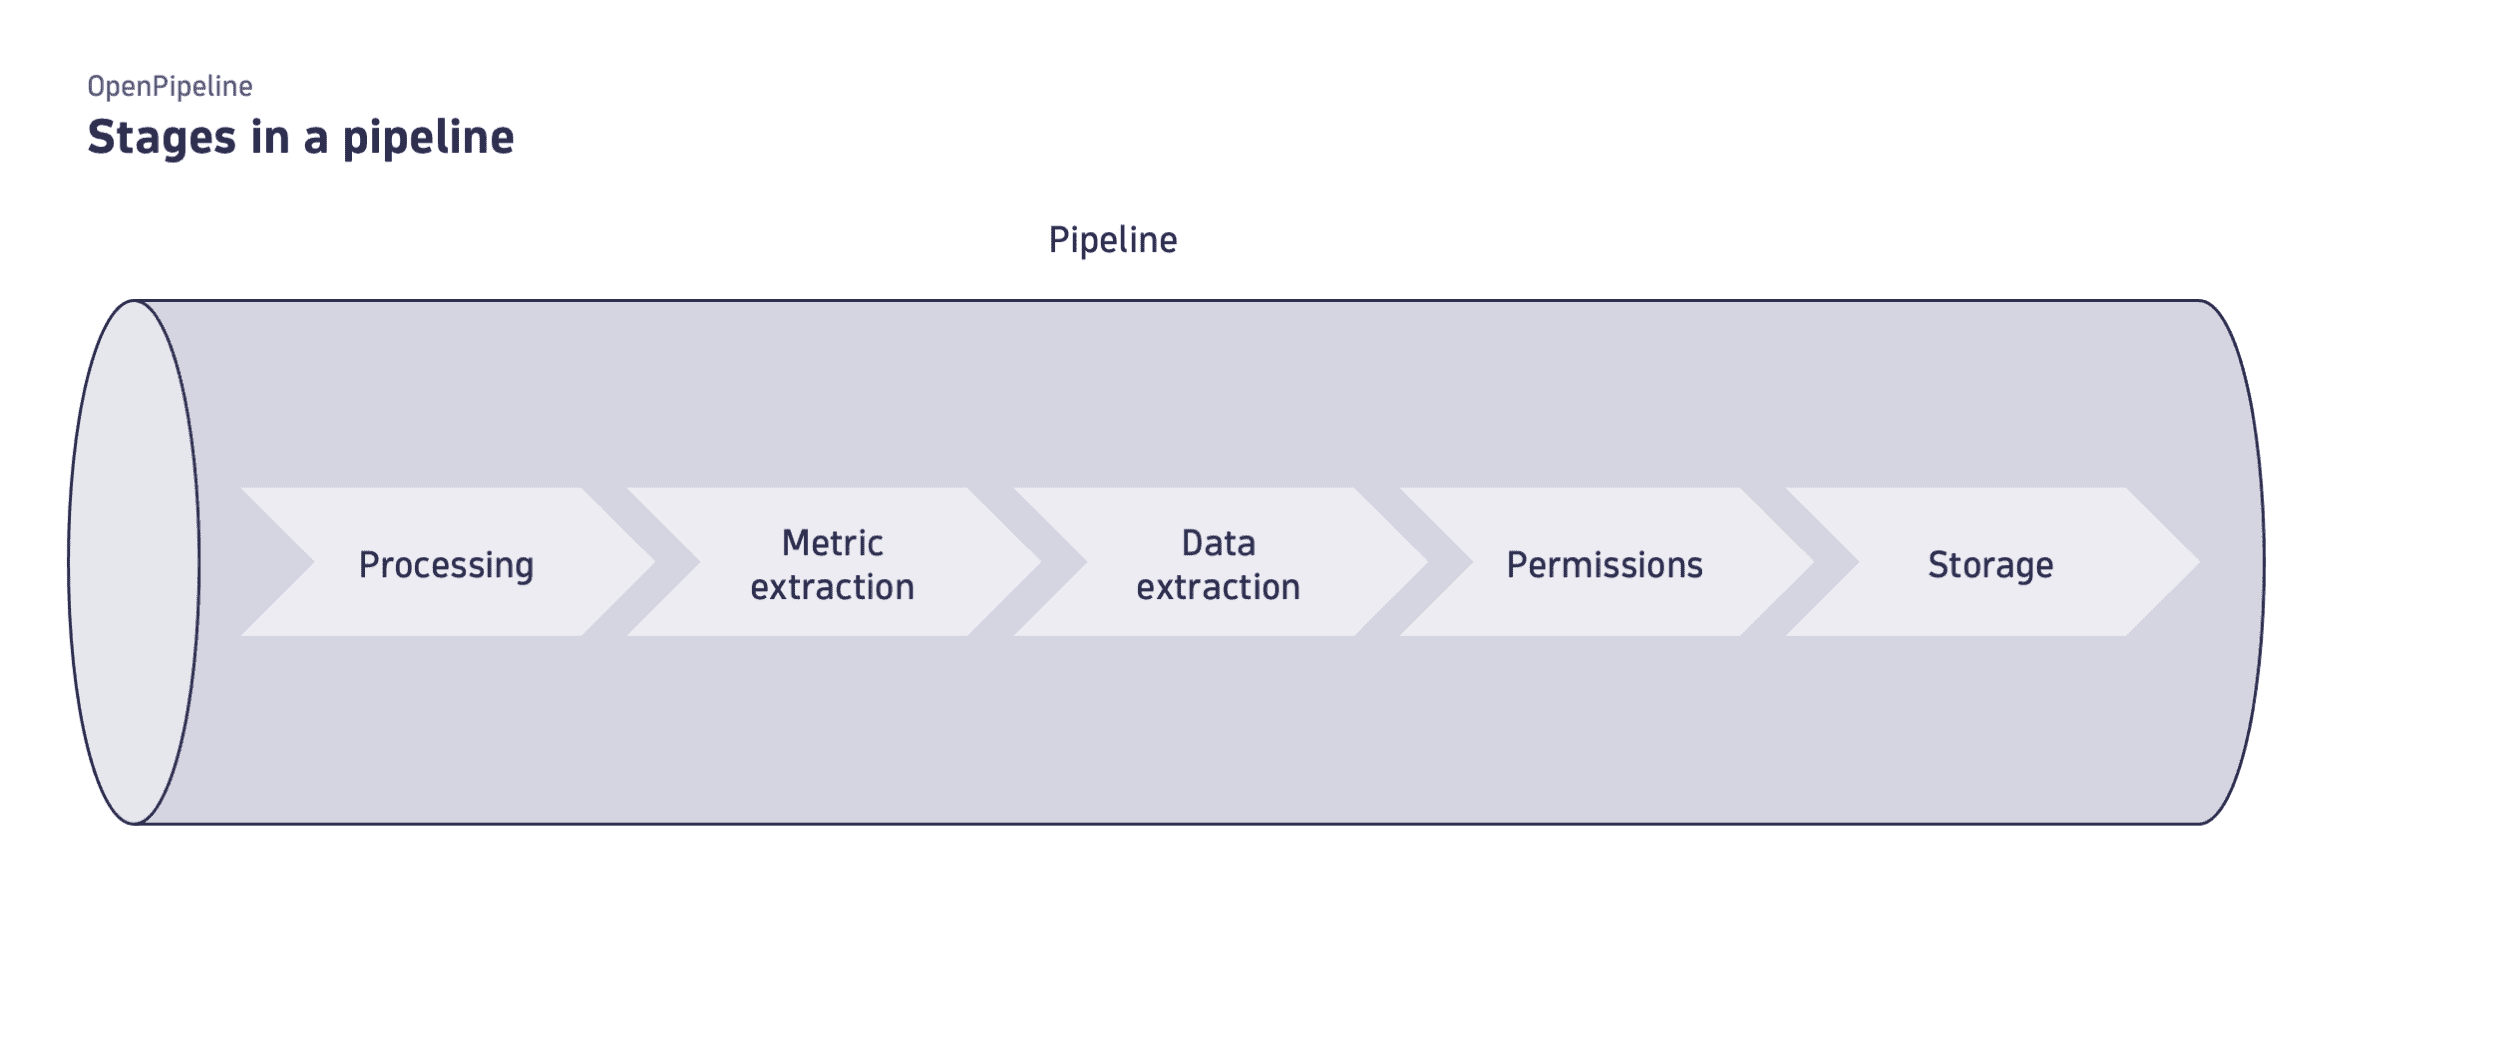 Stages in a pipeline